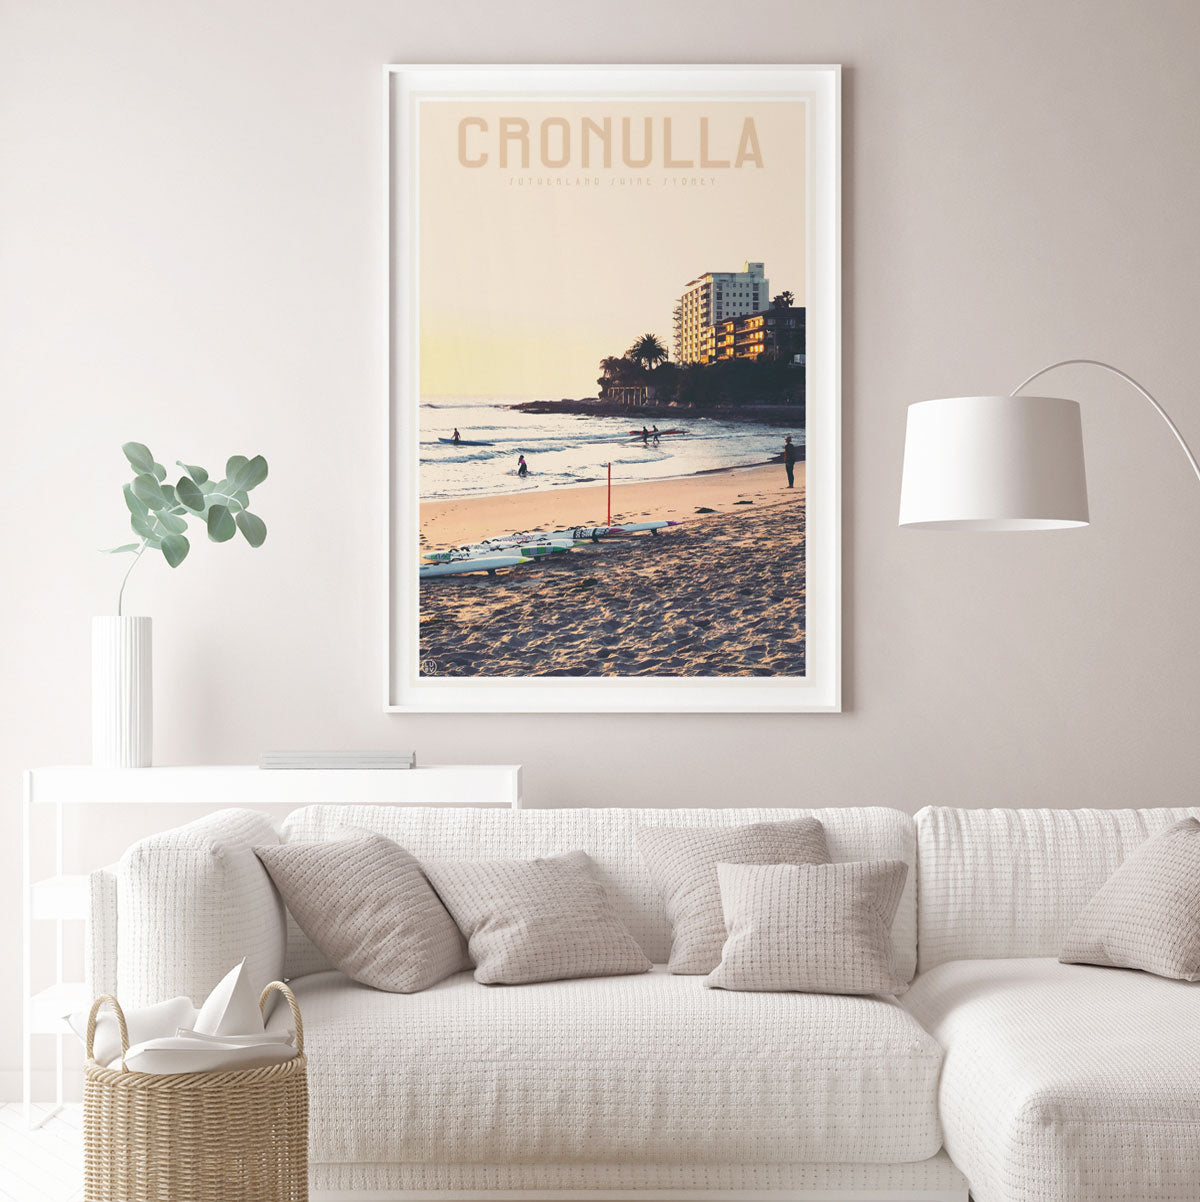 Cronulla Beach vintage style travel print, stylists favourite, designed by places we luv